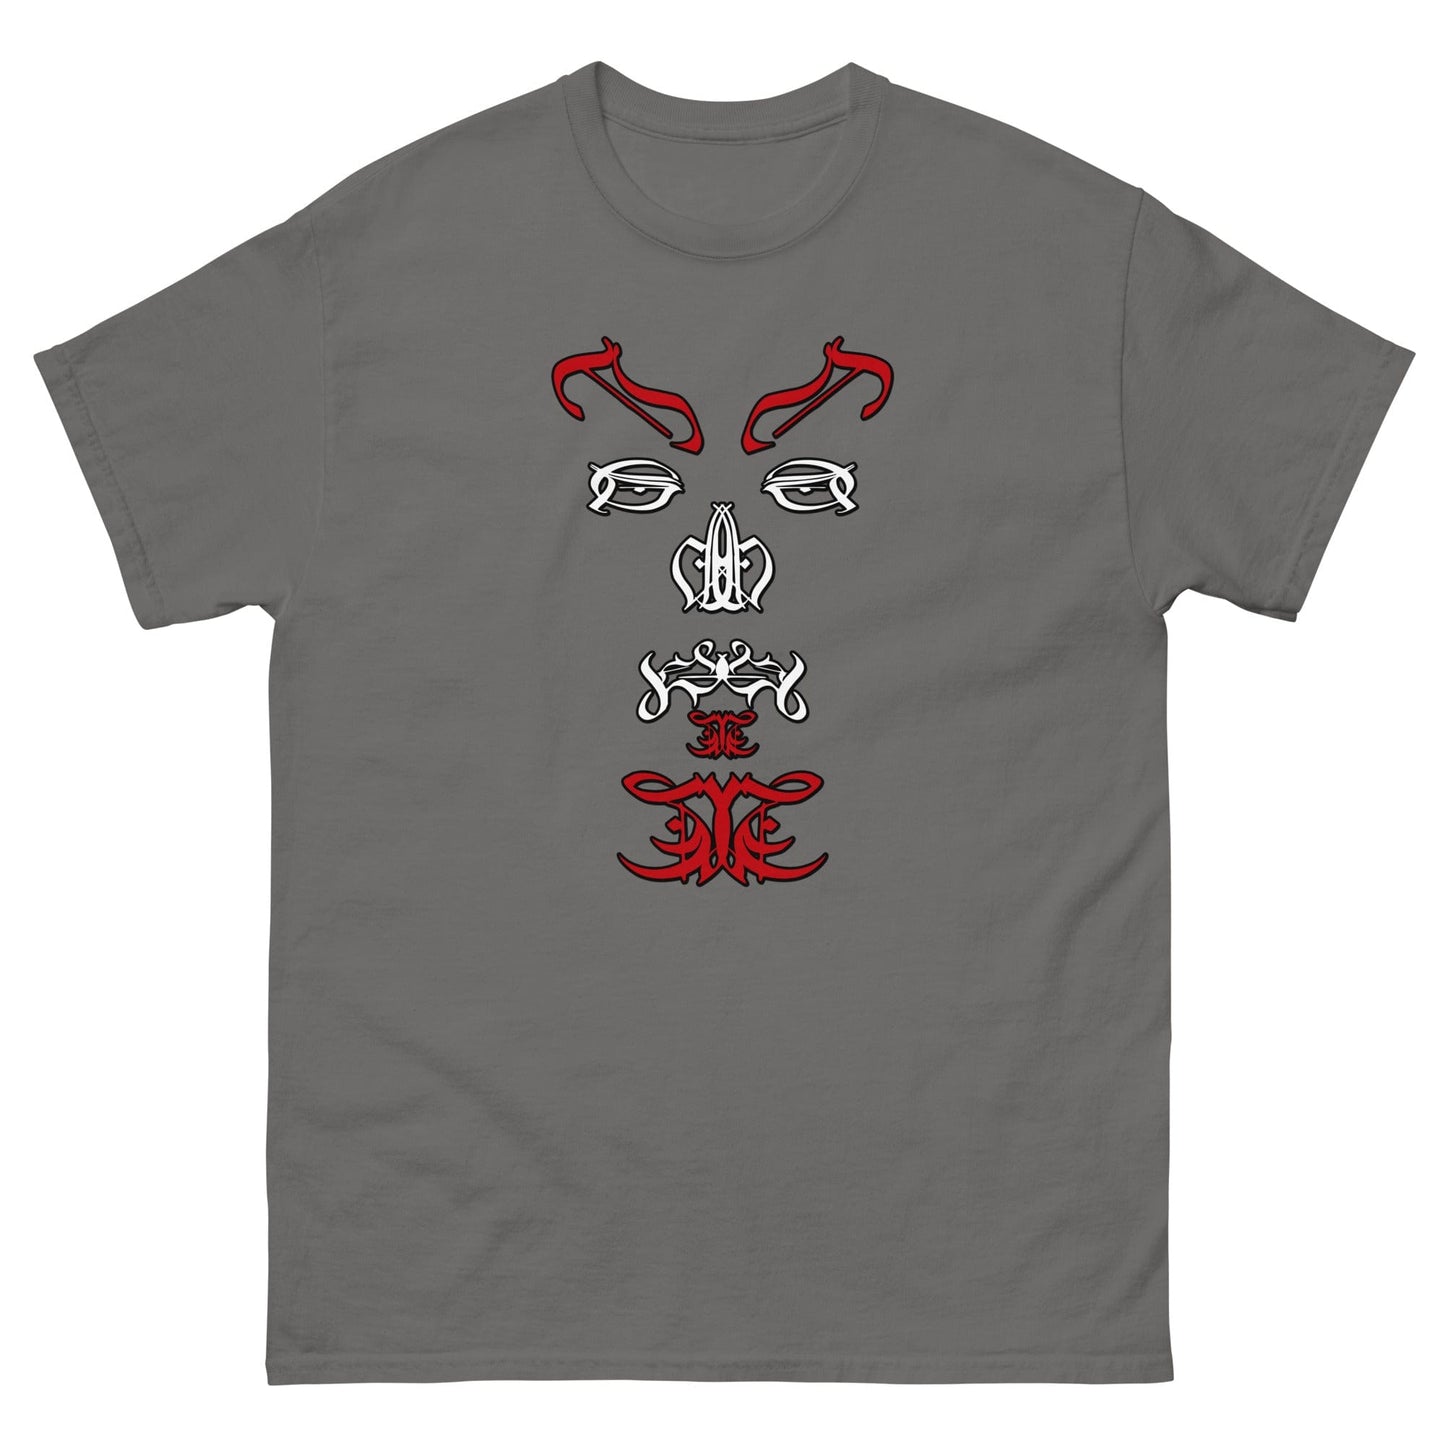 Satan Typographic Face T-shirt Charcoal / S